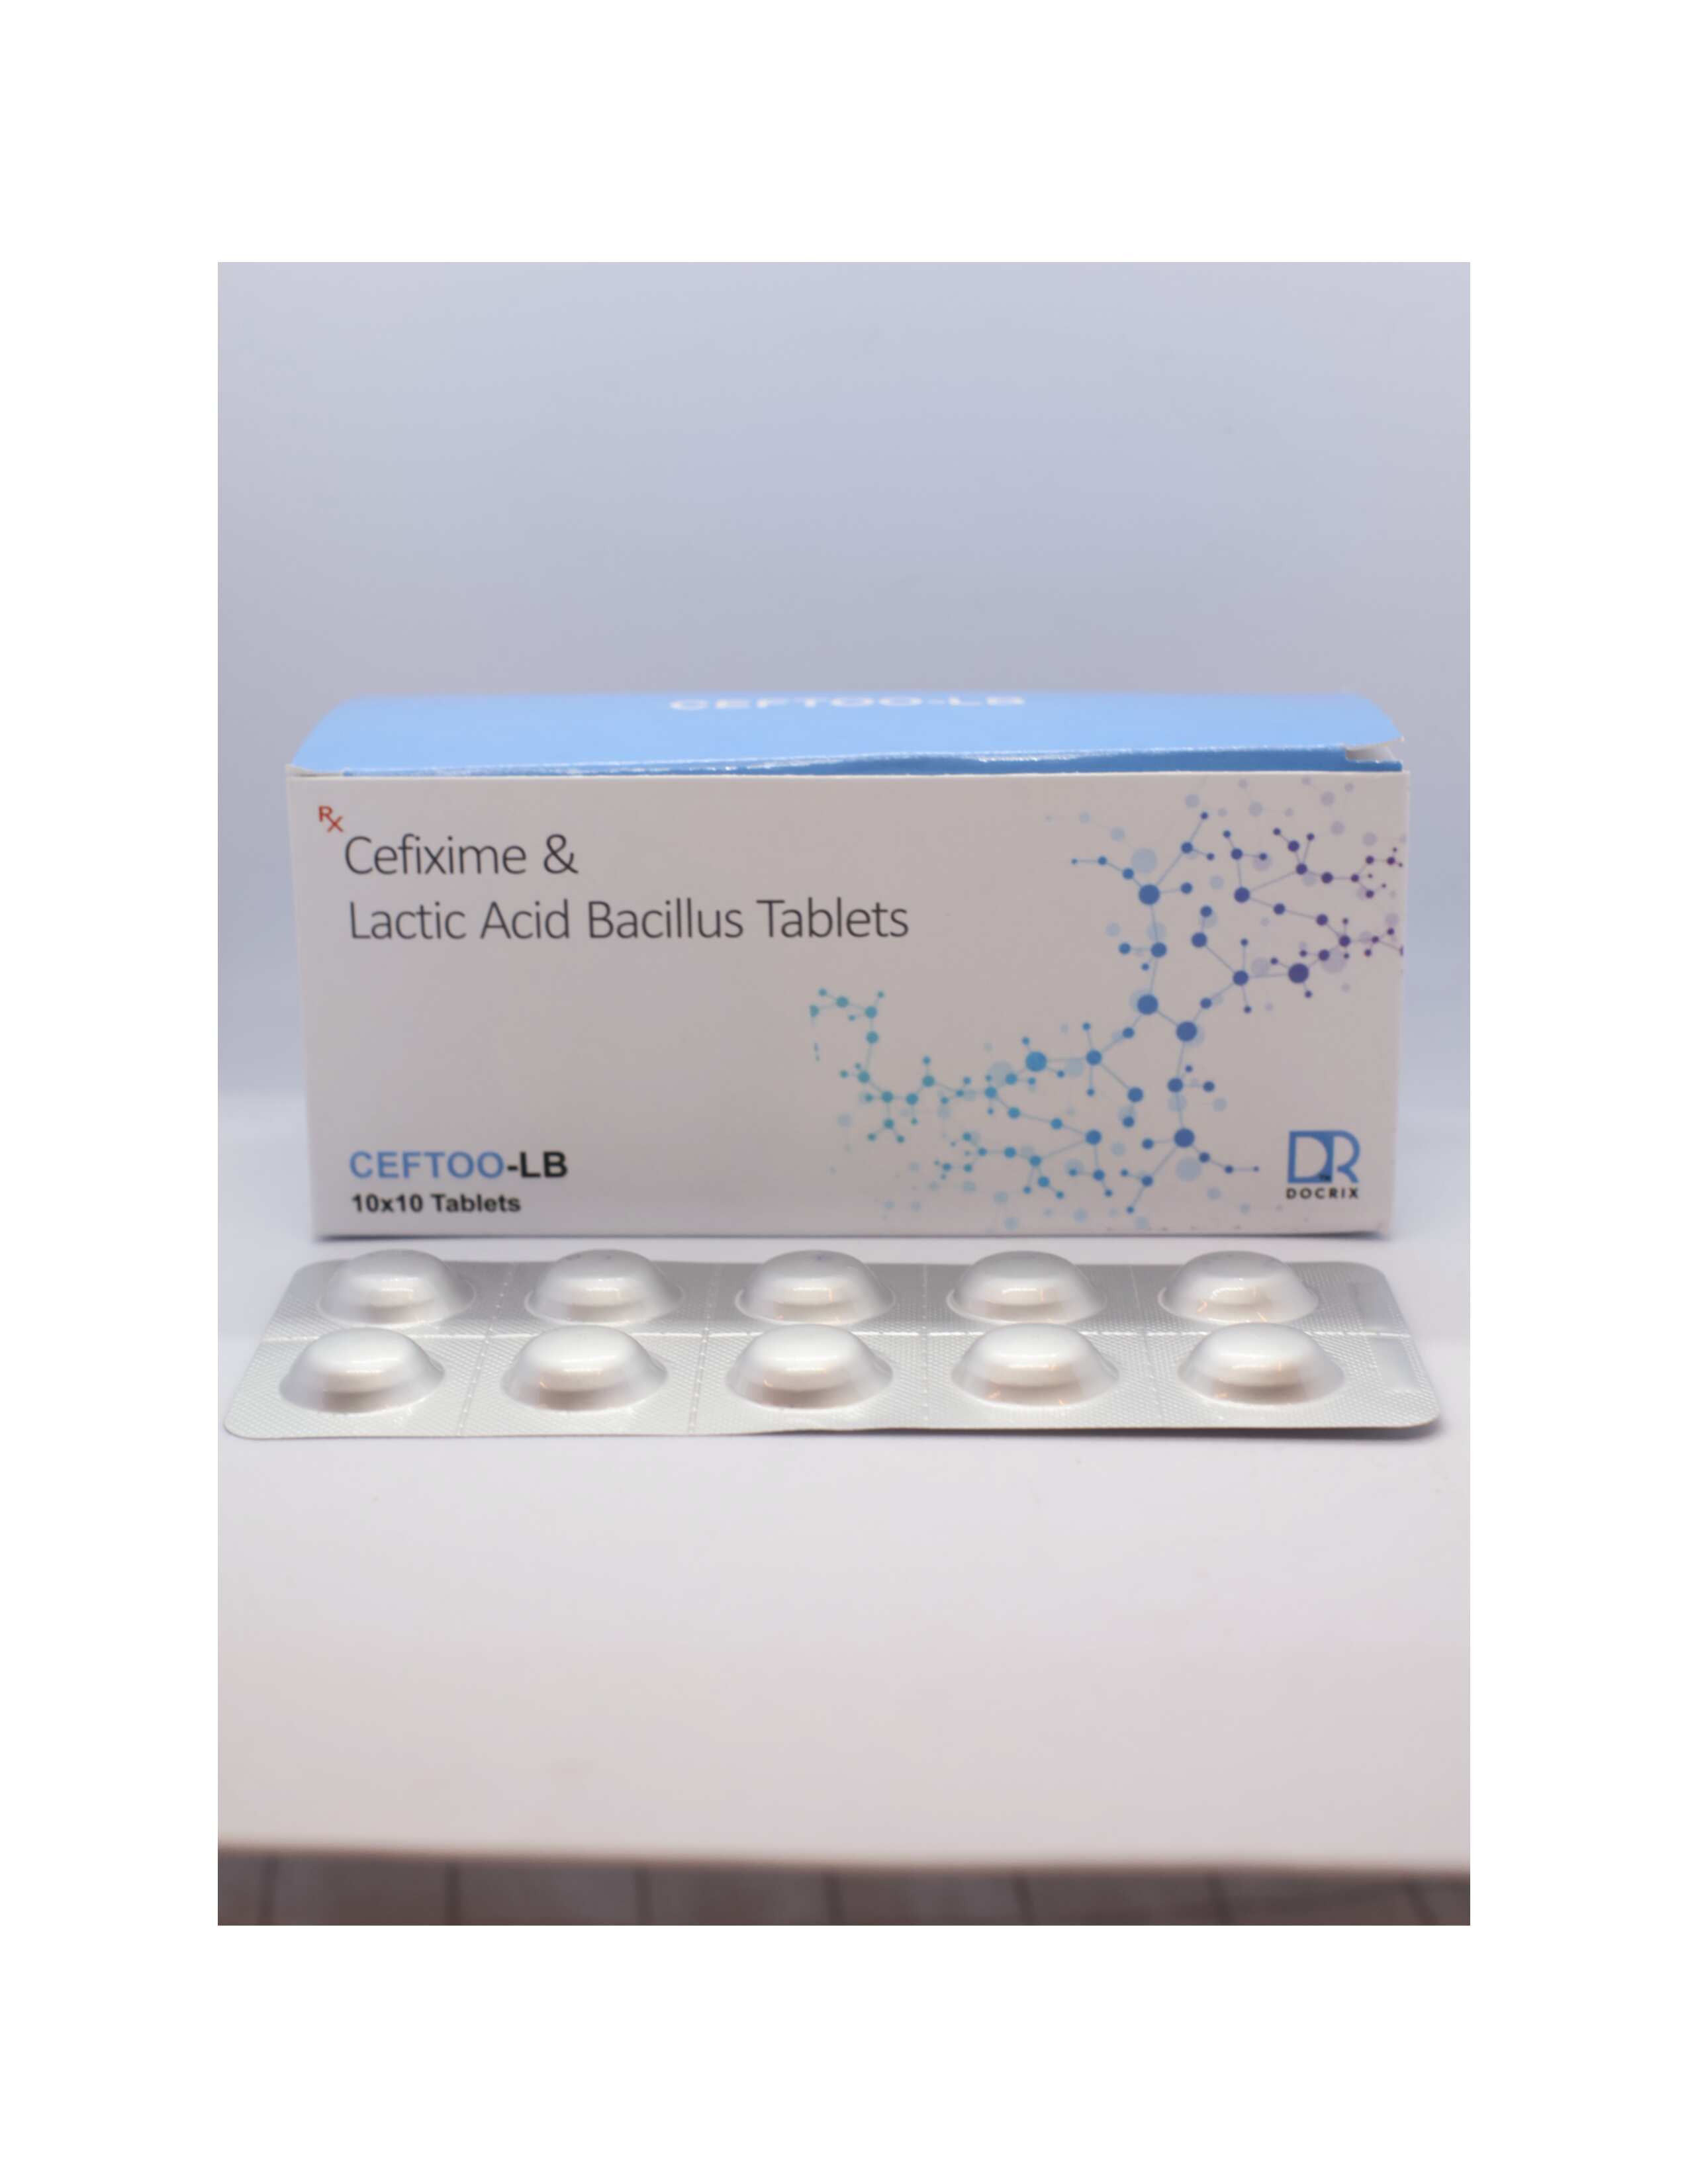 Product Name: Ceftoo LB, Compositions of Ceftoo LB are Cefixime & Lactic Acid Bacillus Tablets - Docrix Healthcare